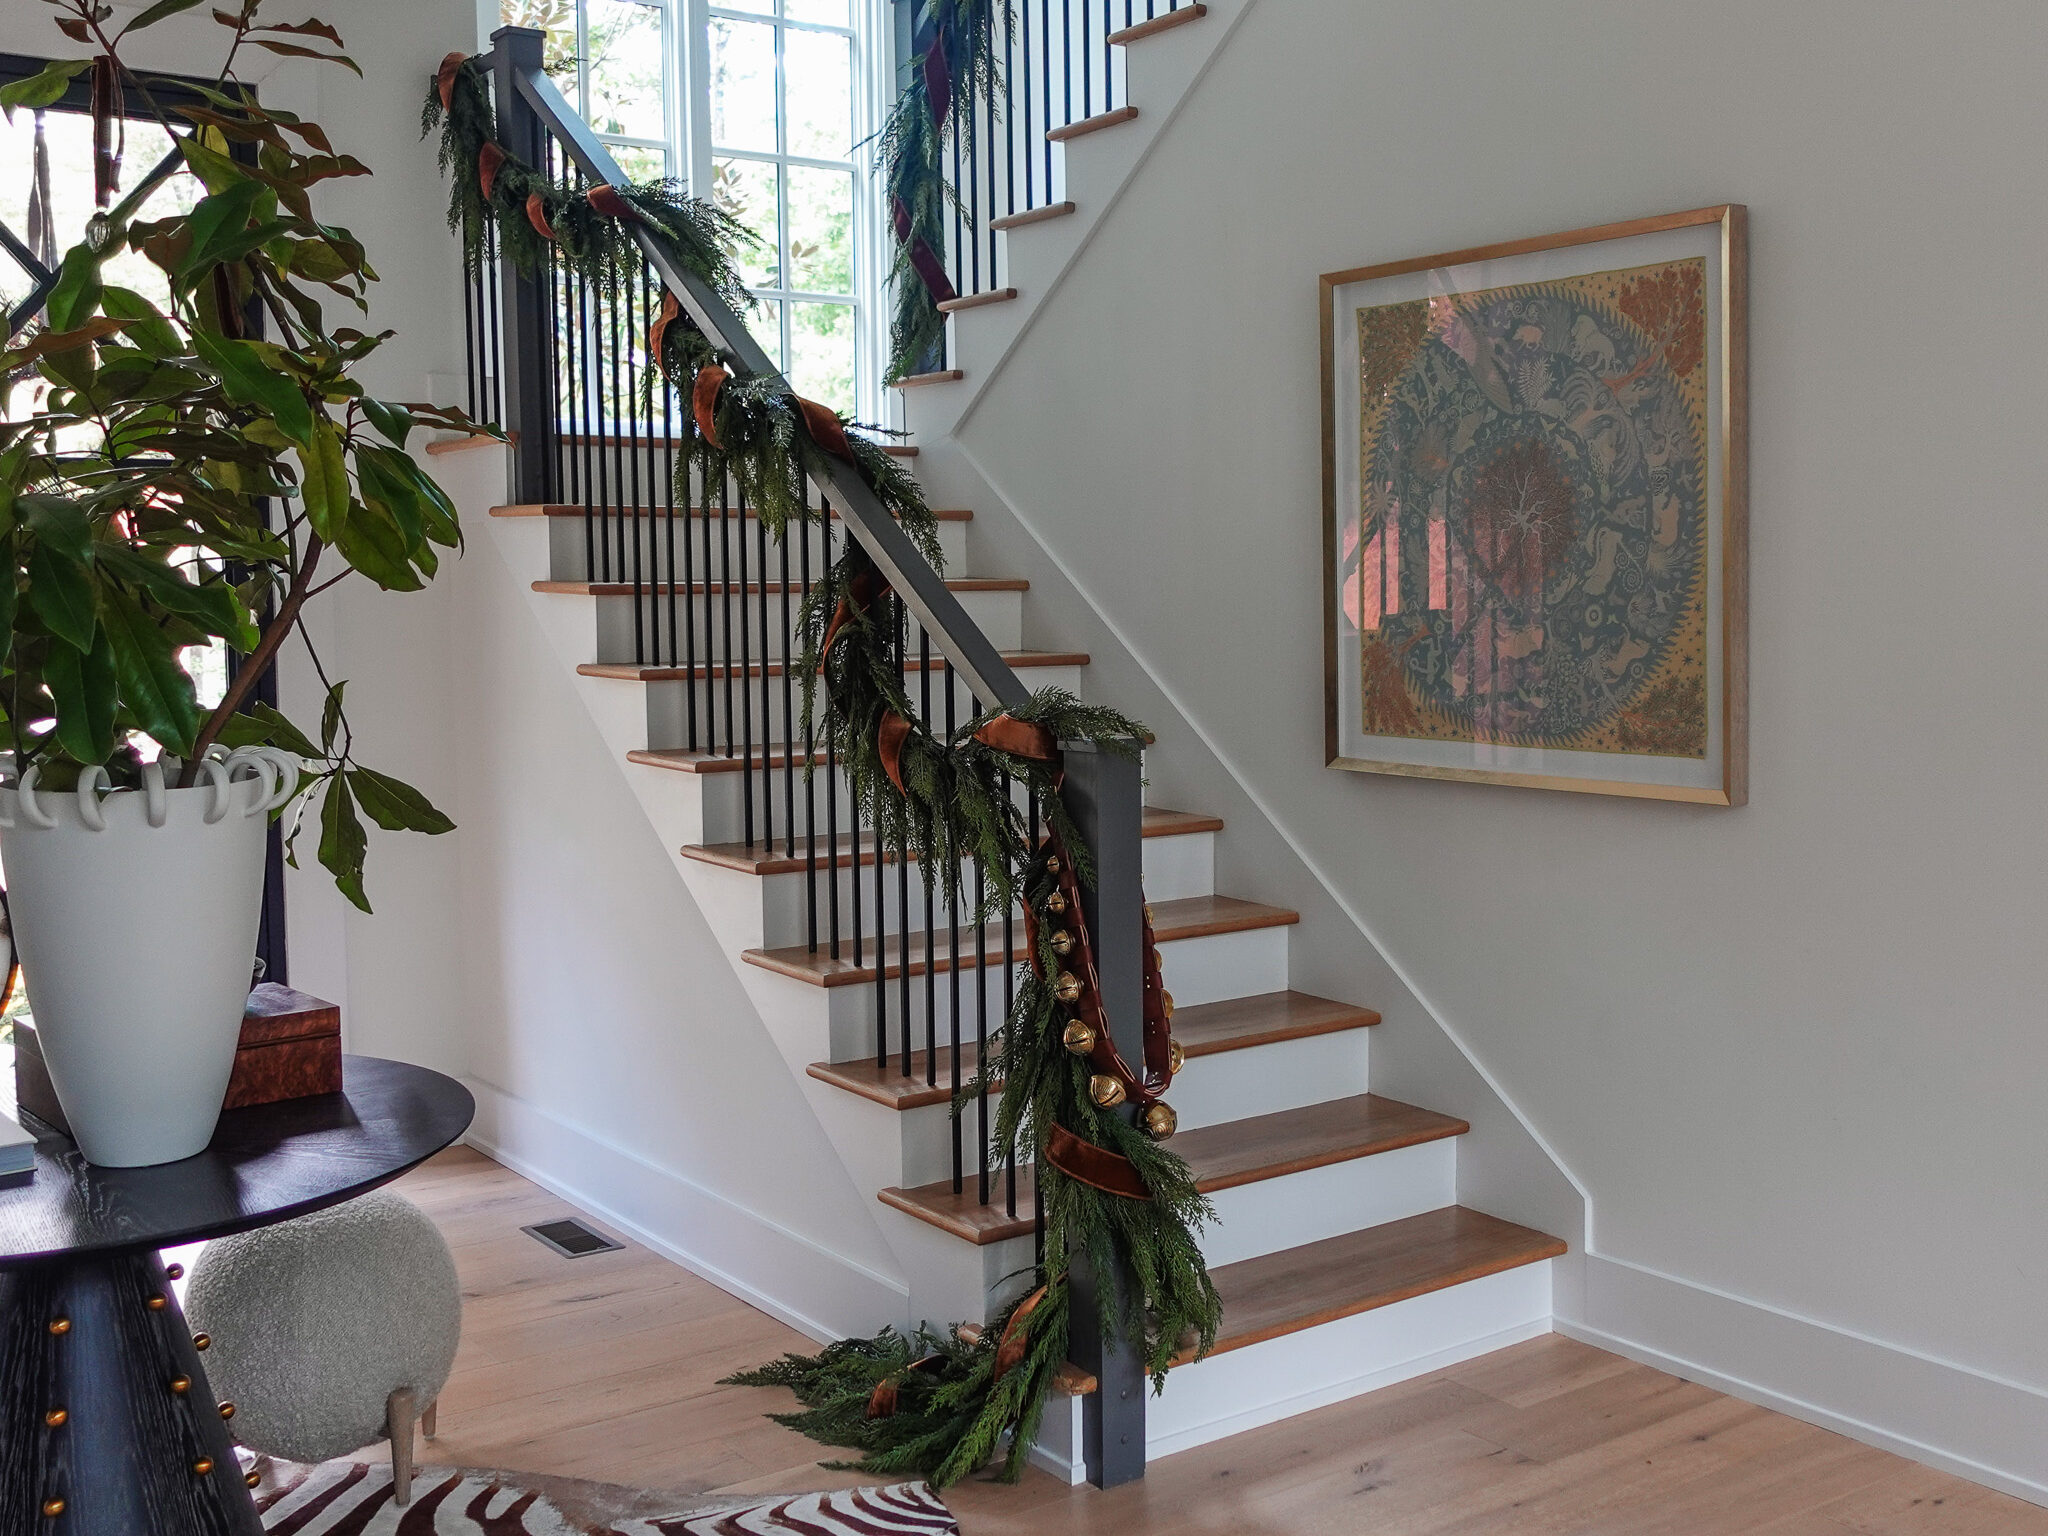 Styled stair shot with garland for holiday decor must-haves